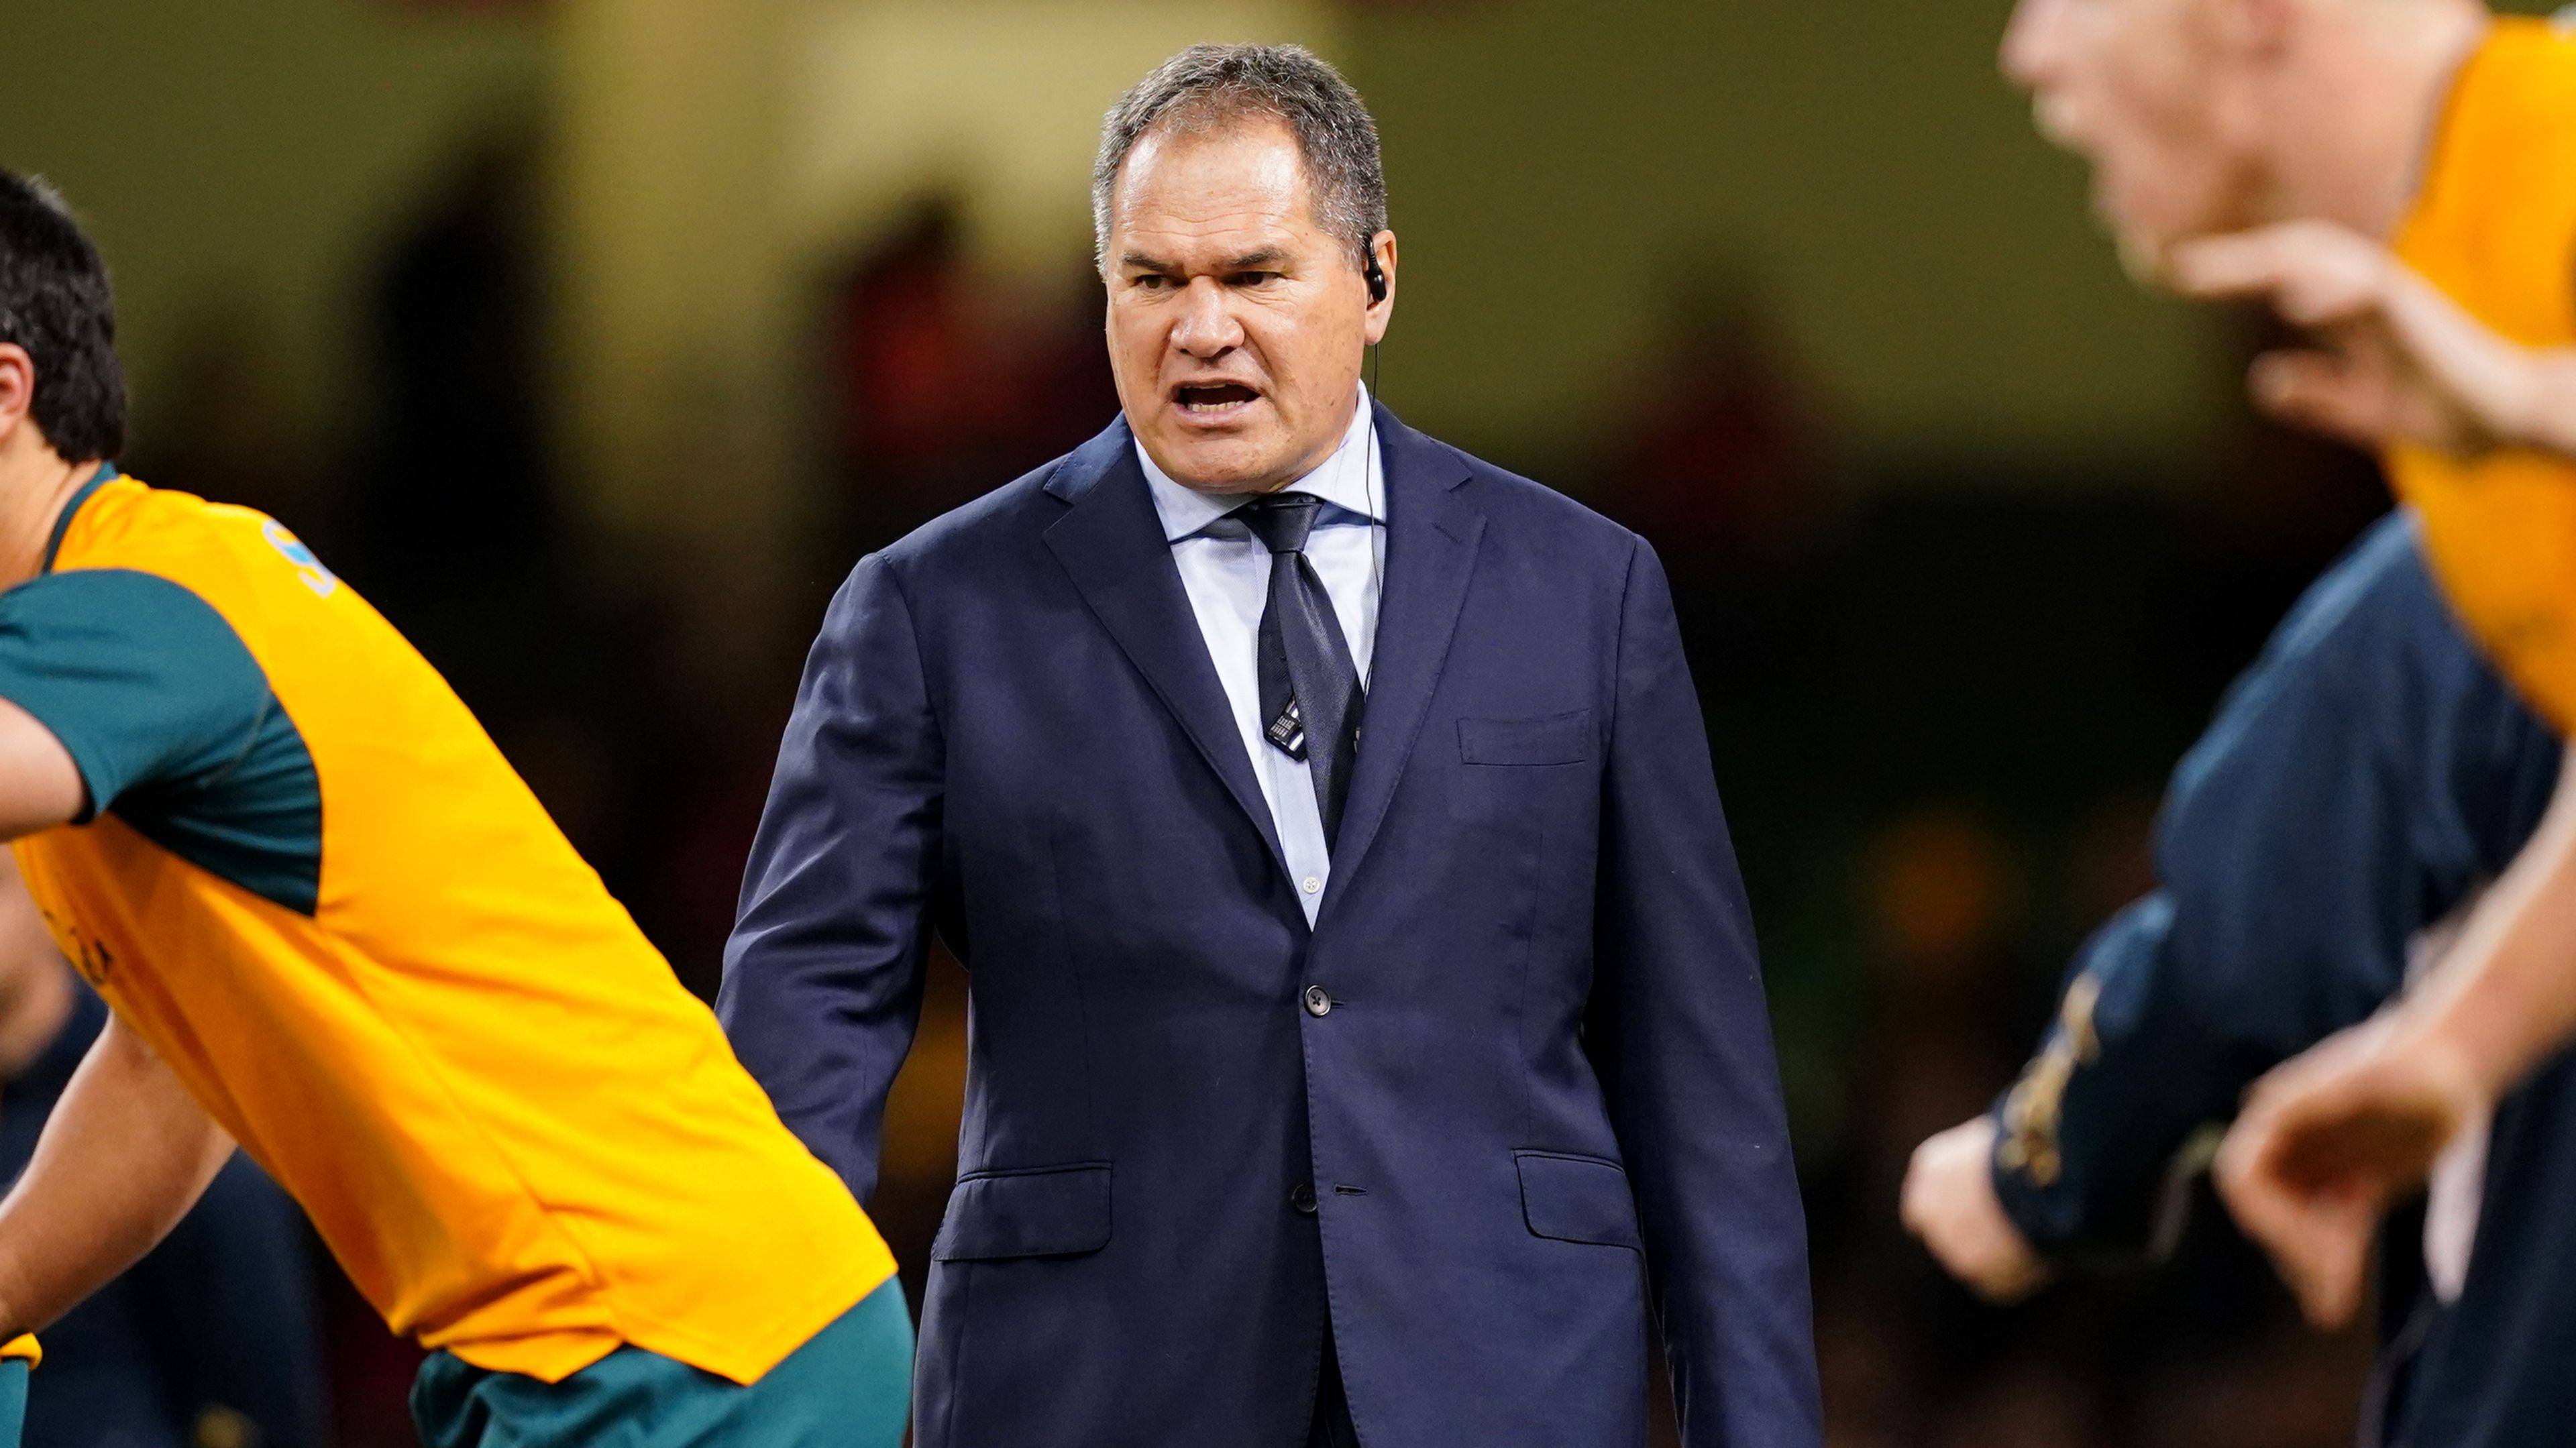 Wallabies head coach Dave Rennie has indicated changes could be afoot to the Giteau Law.